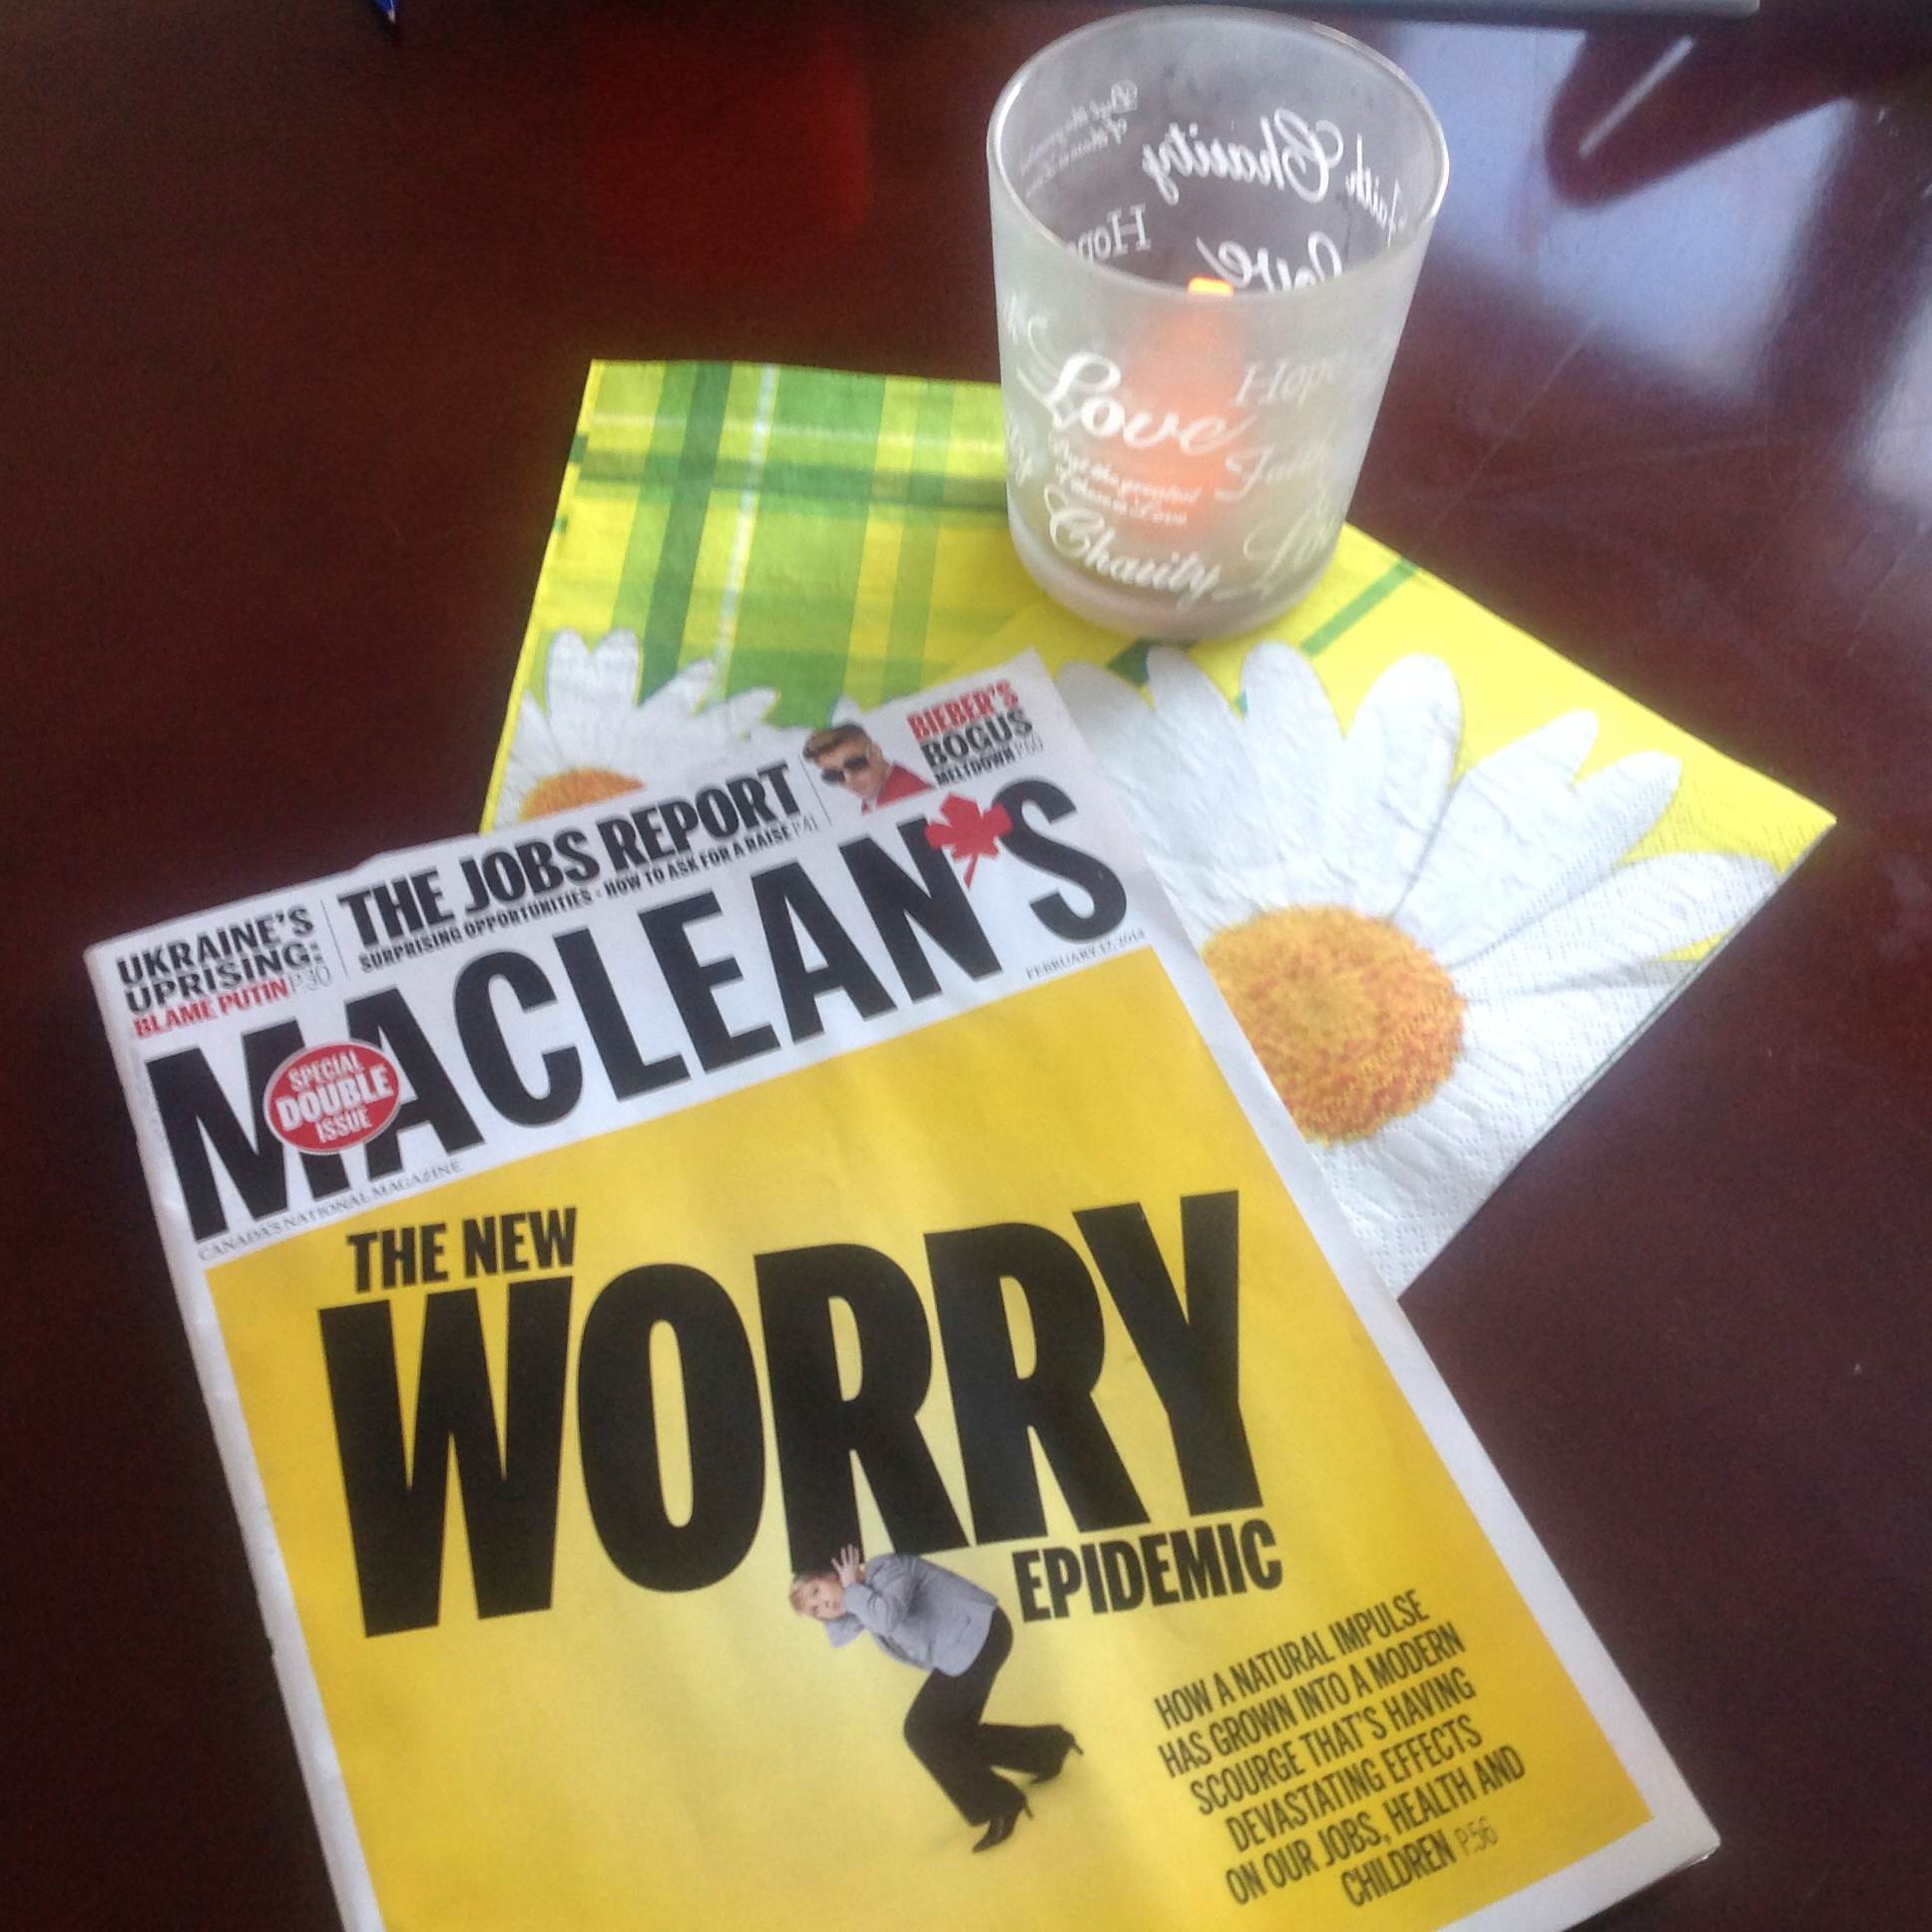 Macleans February 2014 cover that looks at "The New Worry Epidemic" poster by Bergen and Associates